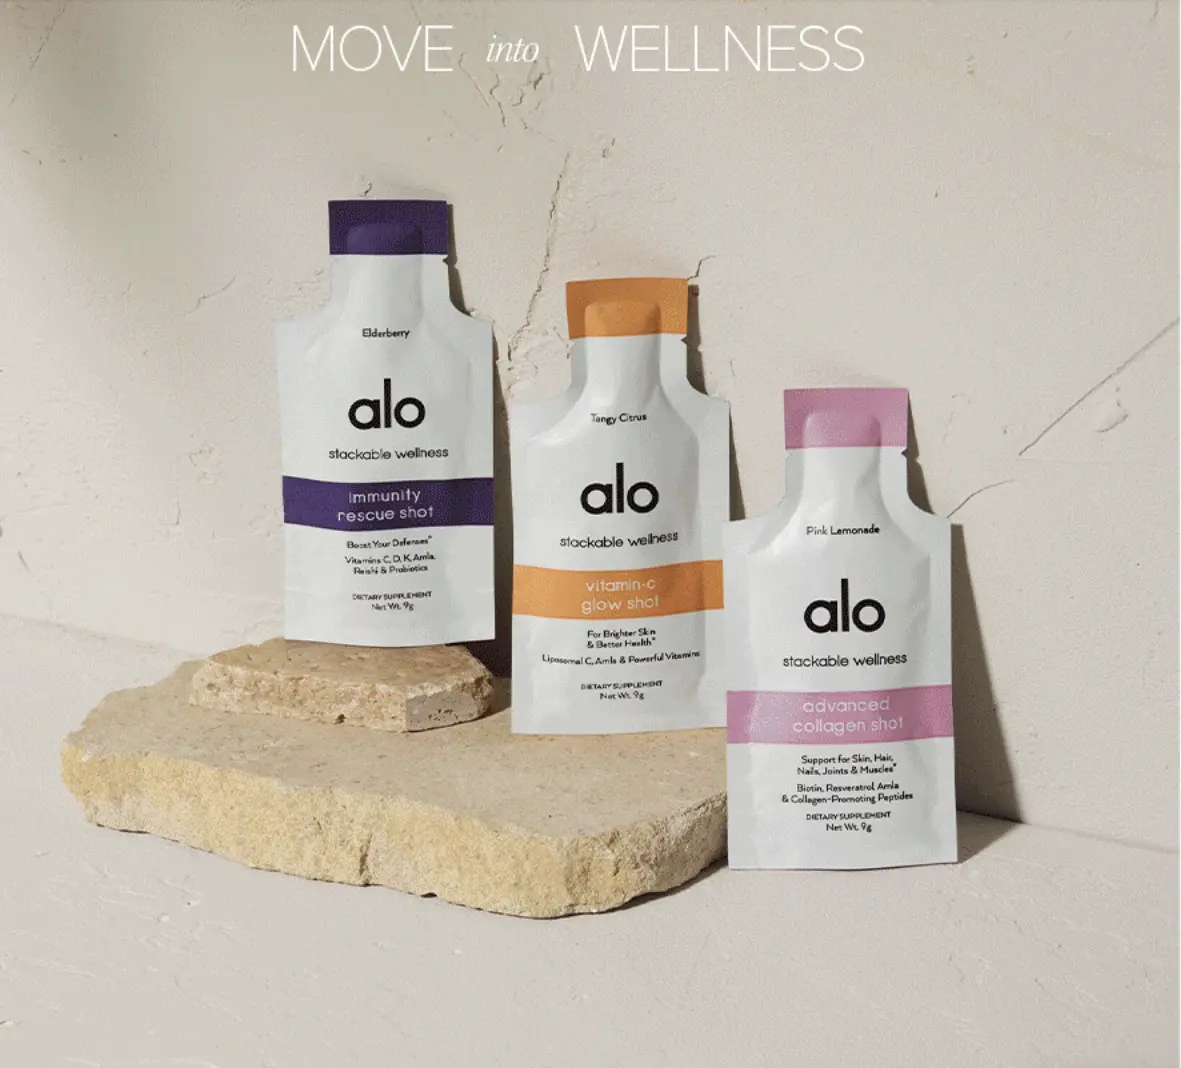 Alo Yoga Launches Supplement Line, Continuing Wellness Push - Athletech News